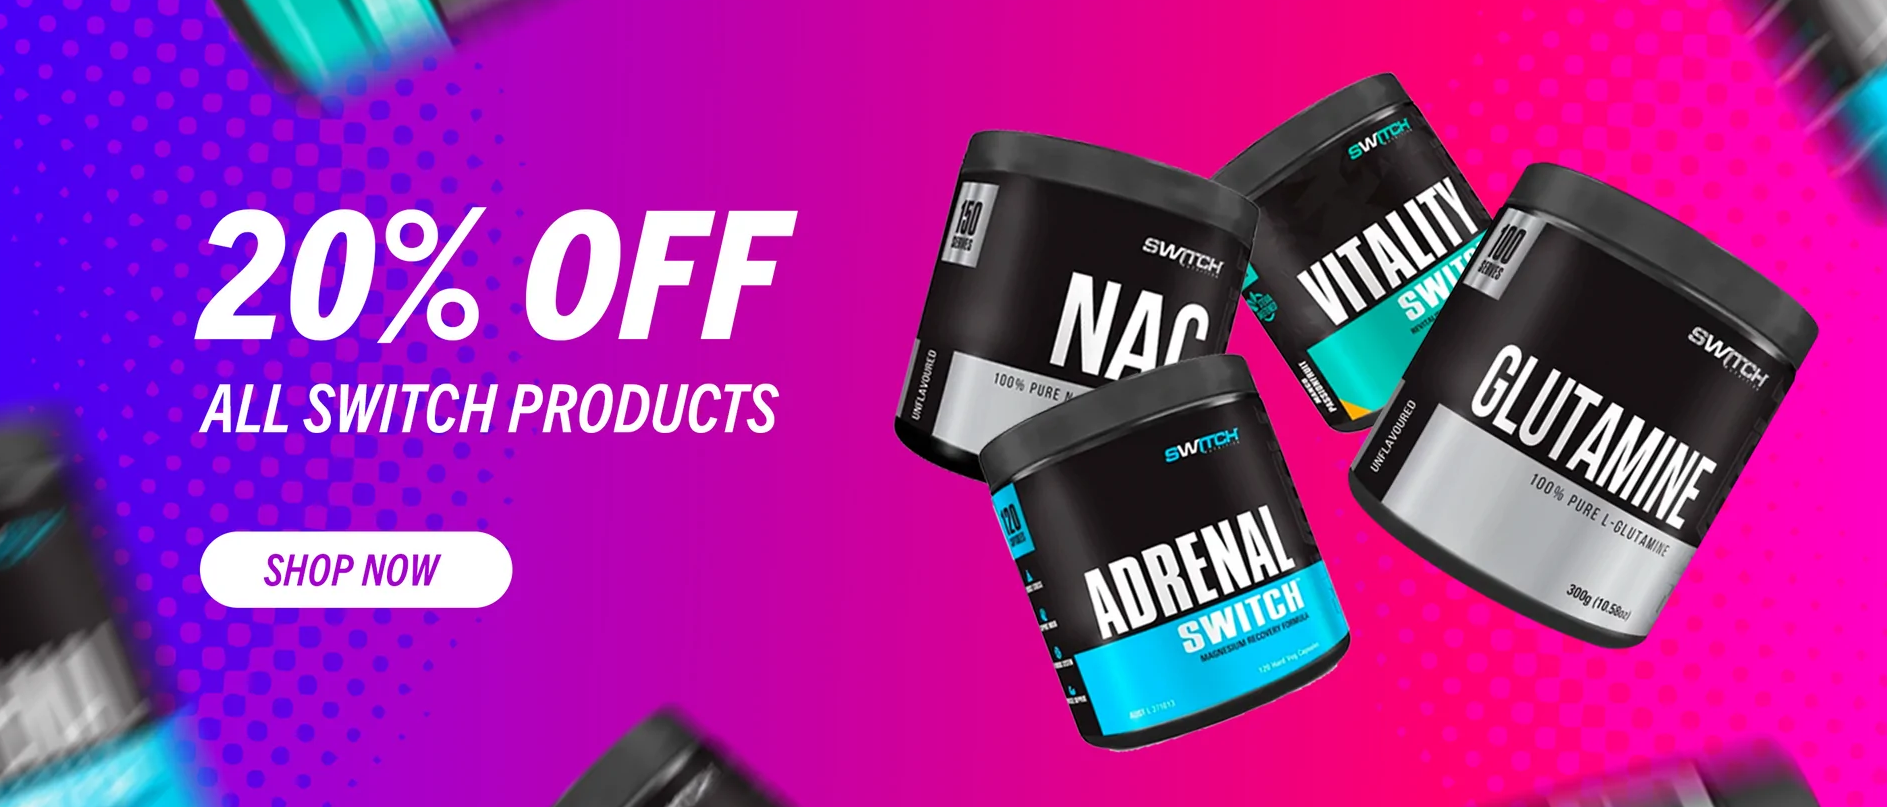 20% OFF on all Switch products at Fit Nutrition